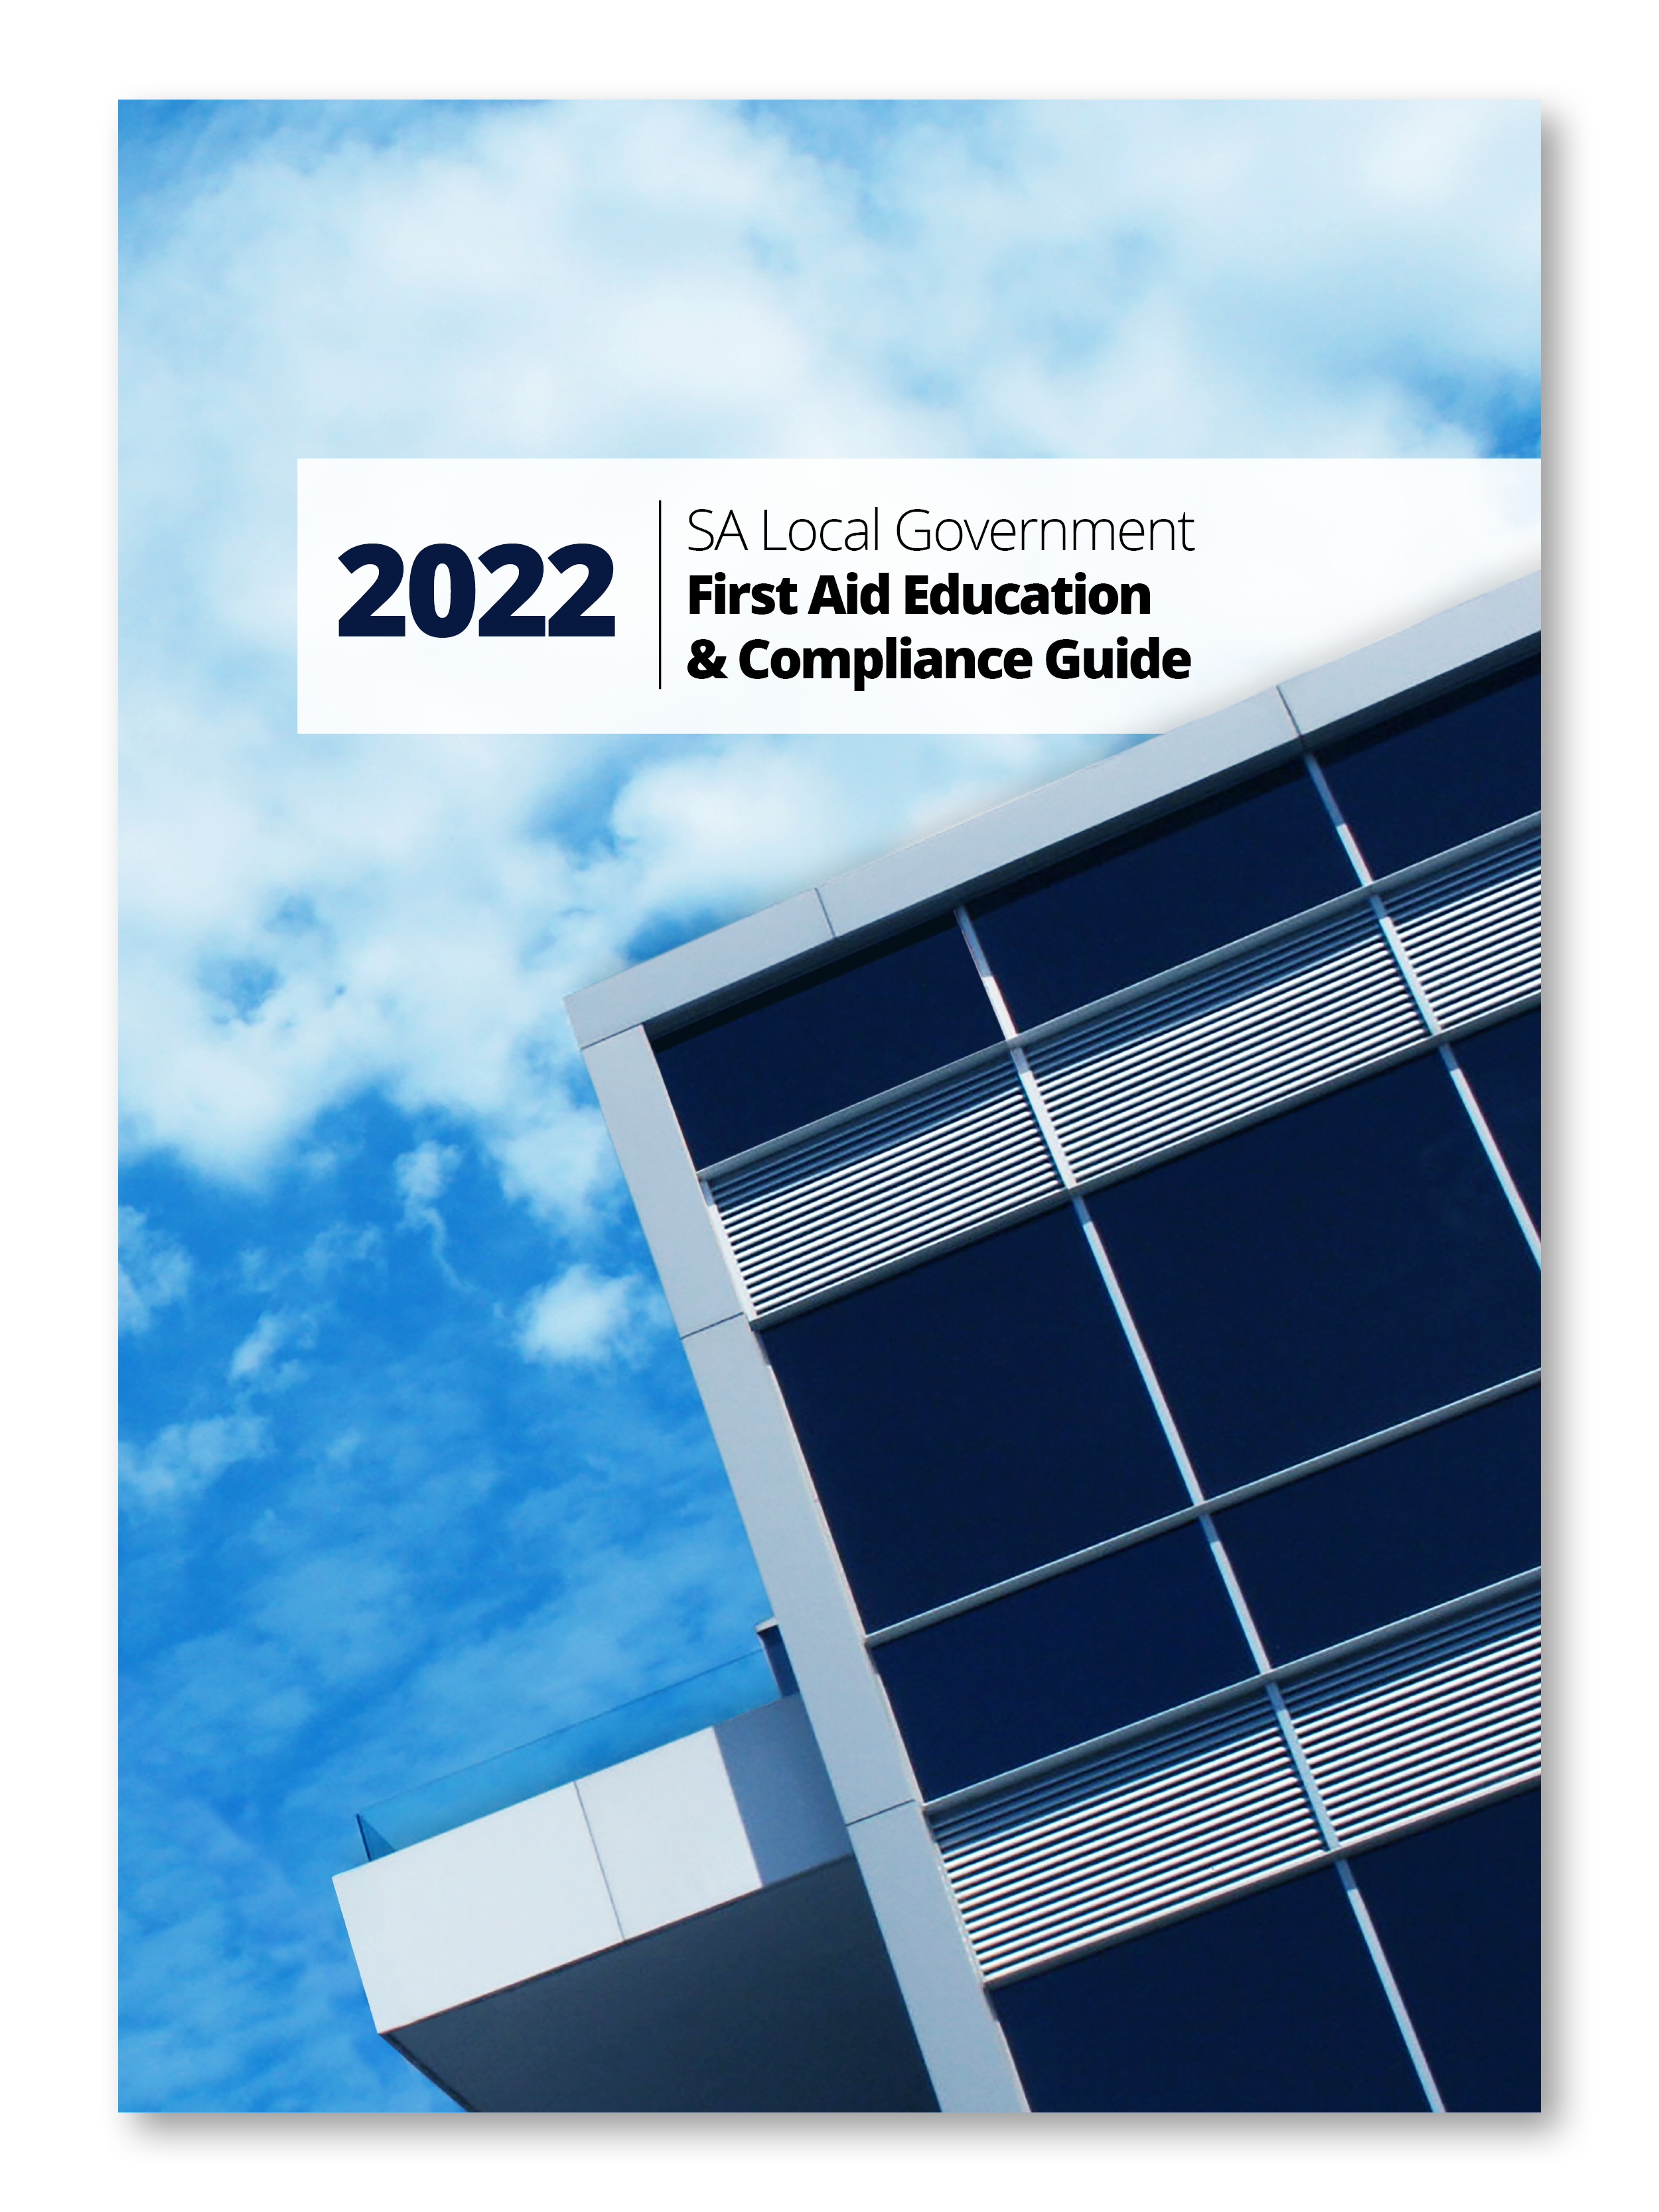 St John SA Local Government First Aid Education & Compliance Guide 2022